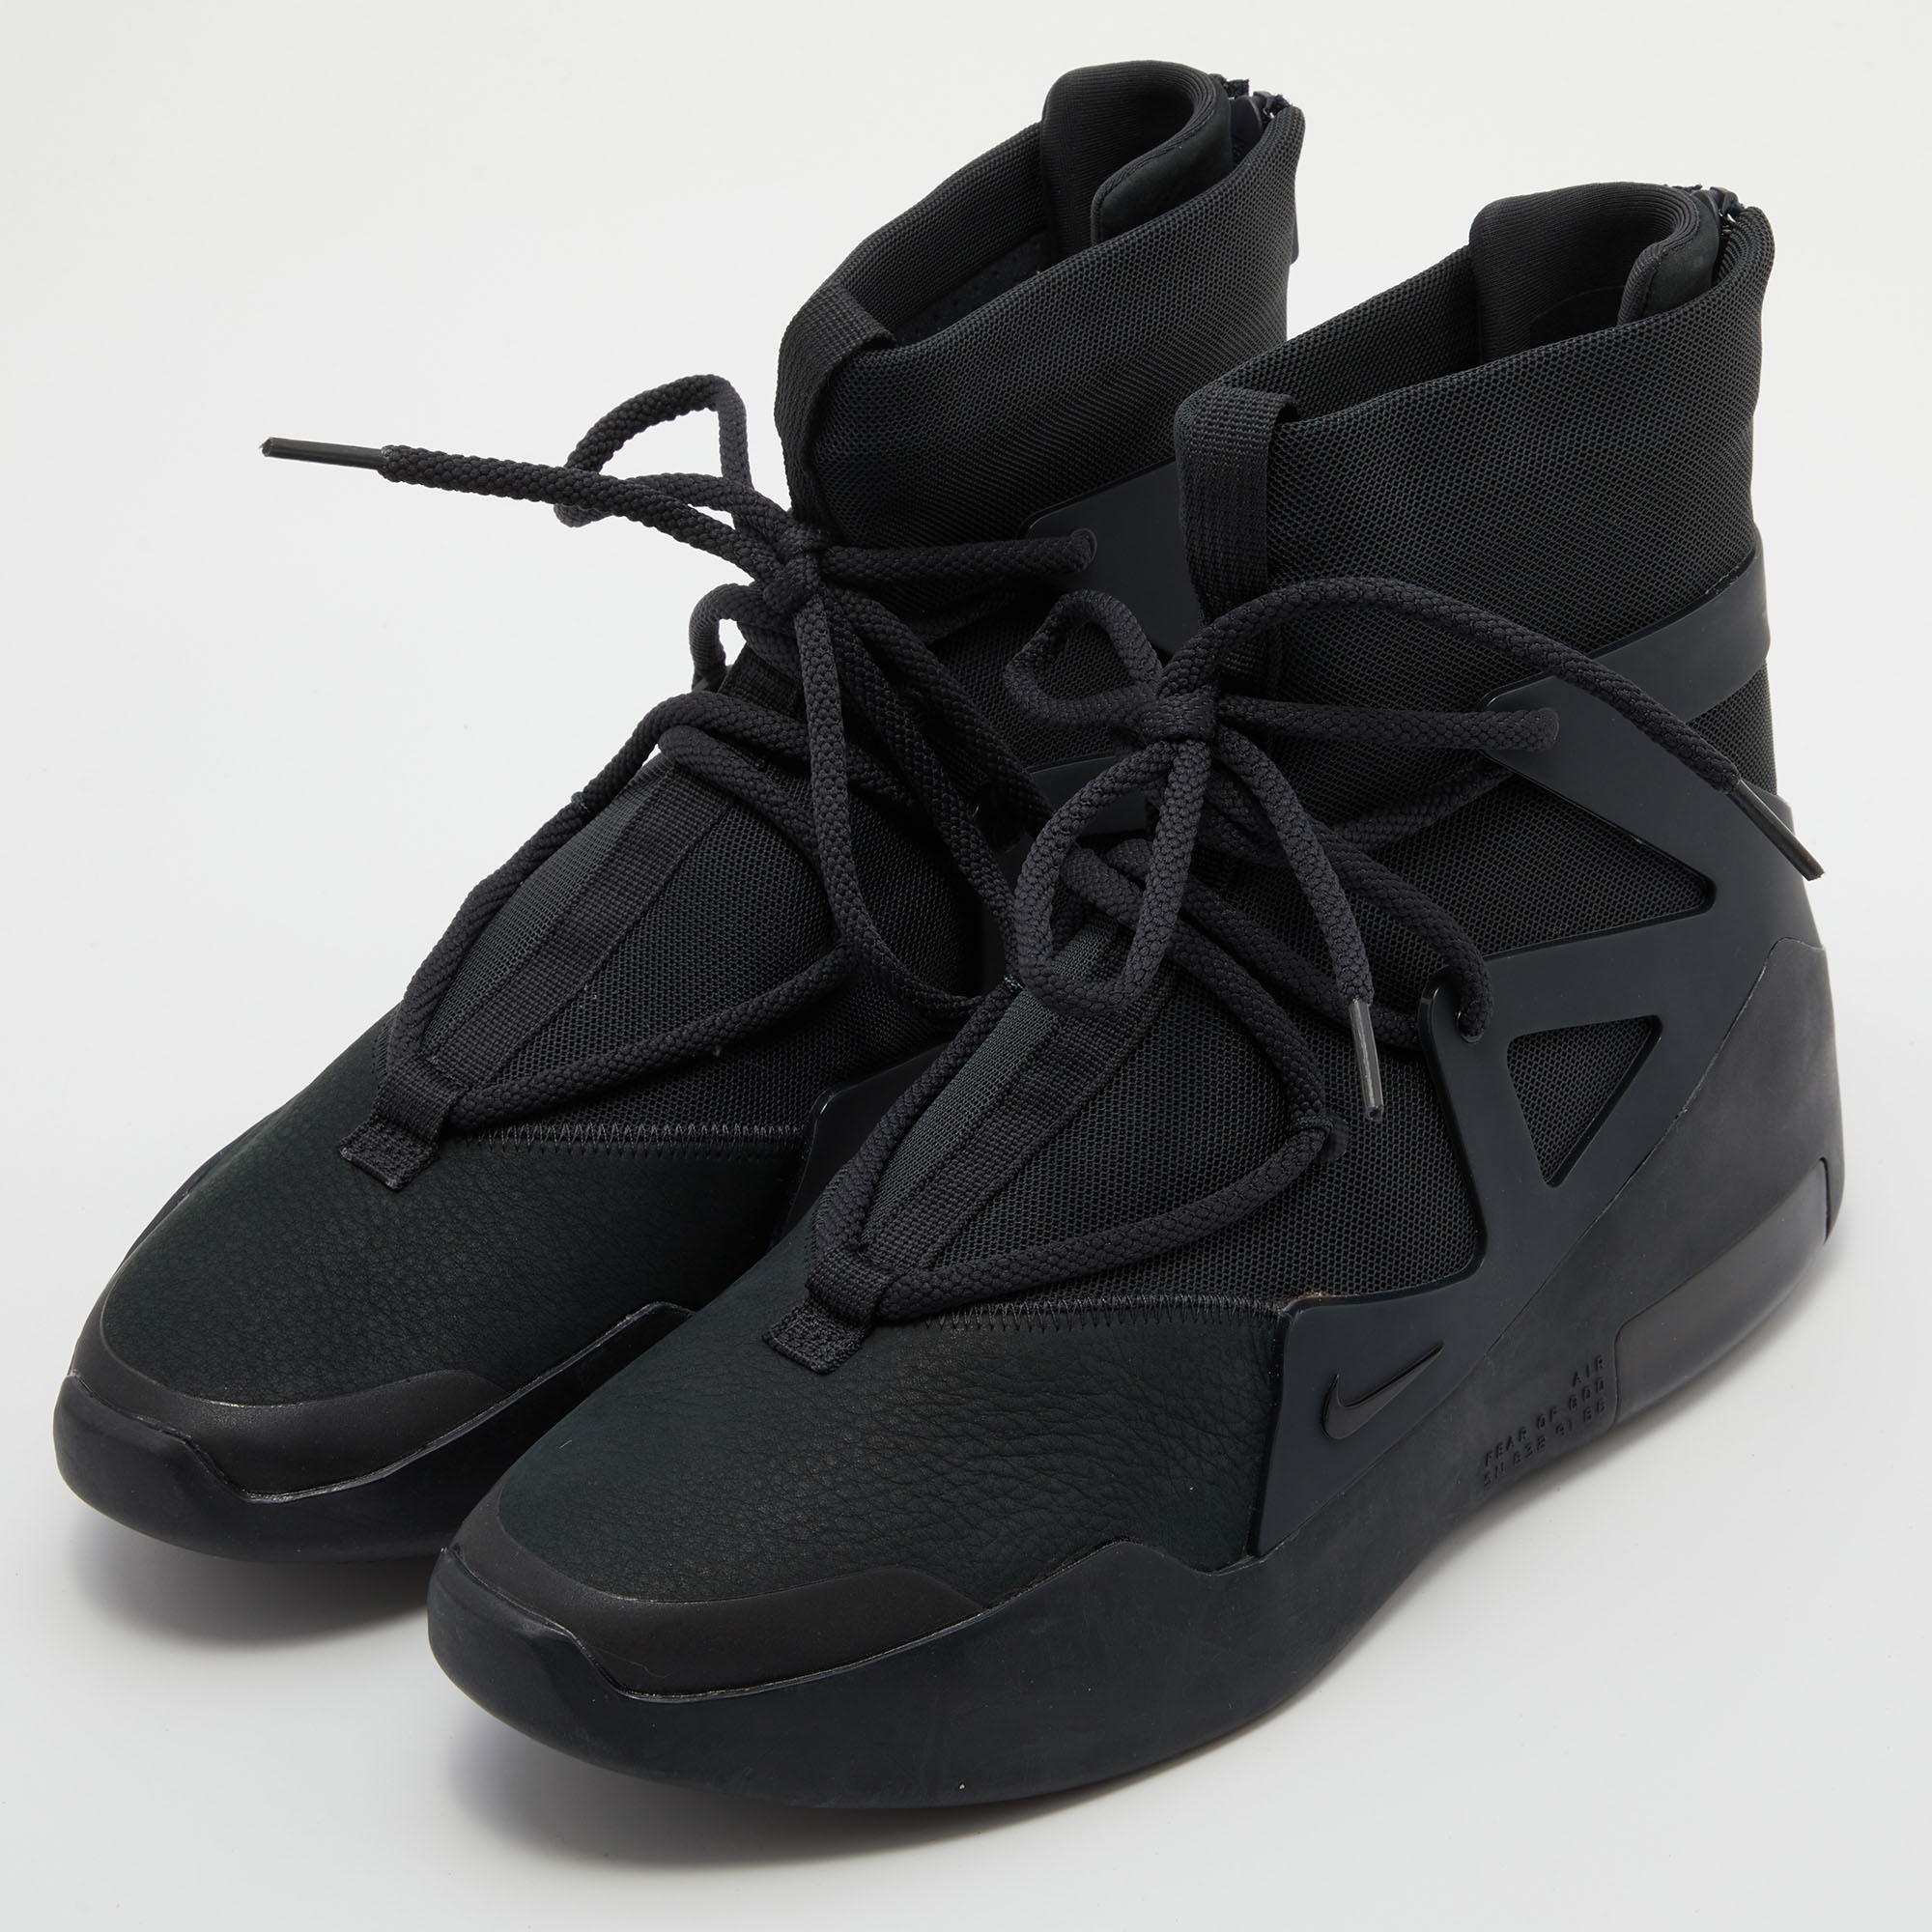 

Nike Air X Fear Of God Black Leather and Mesh High Top Sneakers Size